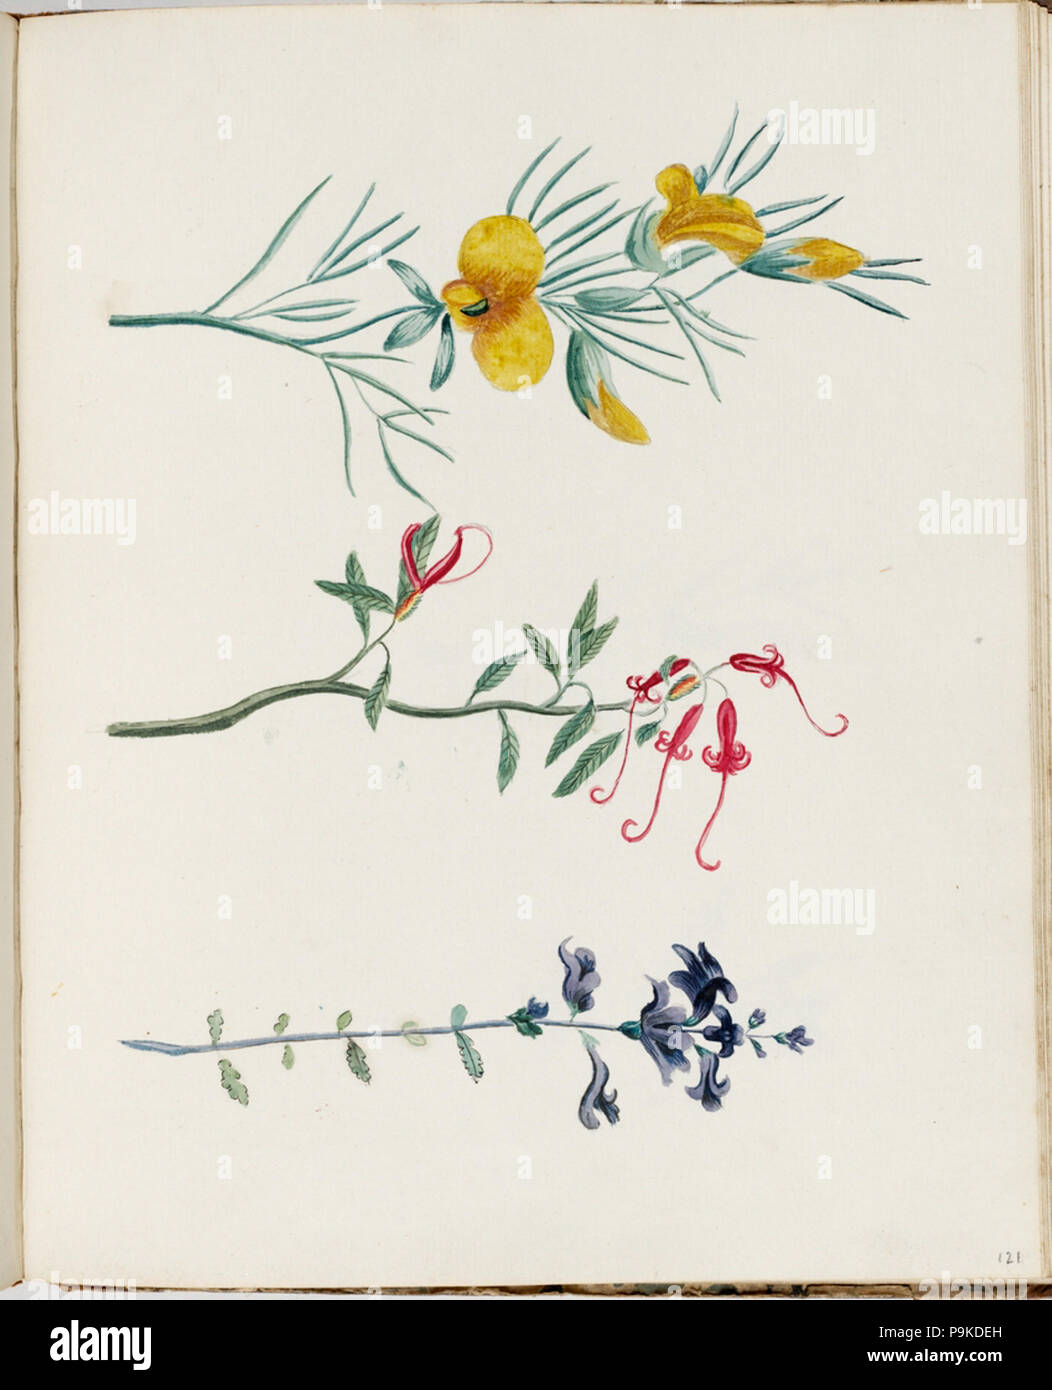 SLNSW 271 479481 Untitled beau pois wedge Red spider flower l'euphraise Banque D'Images